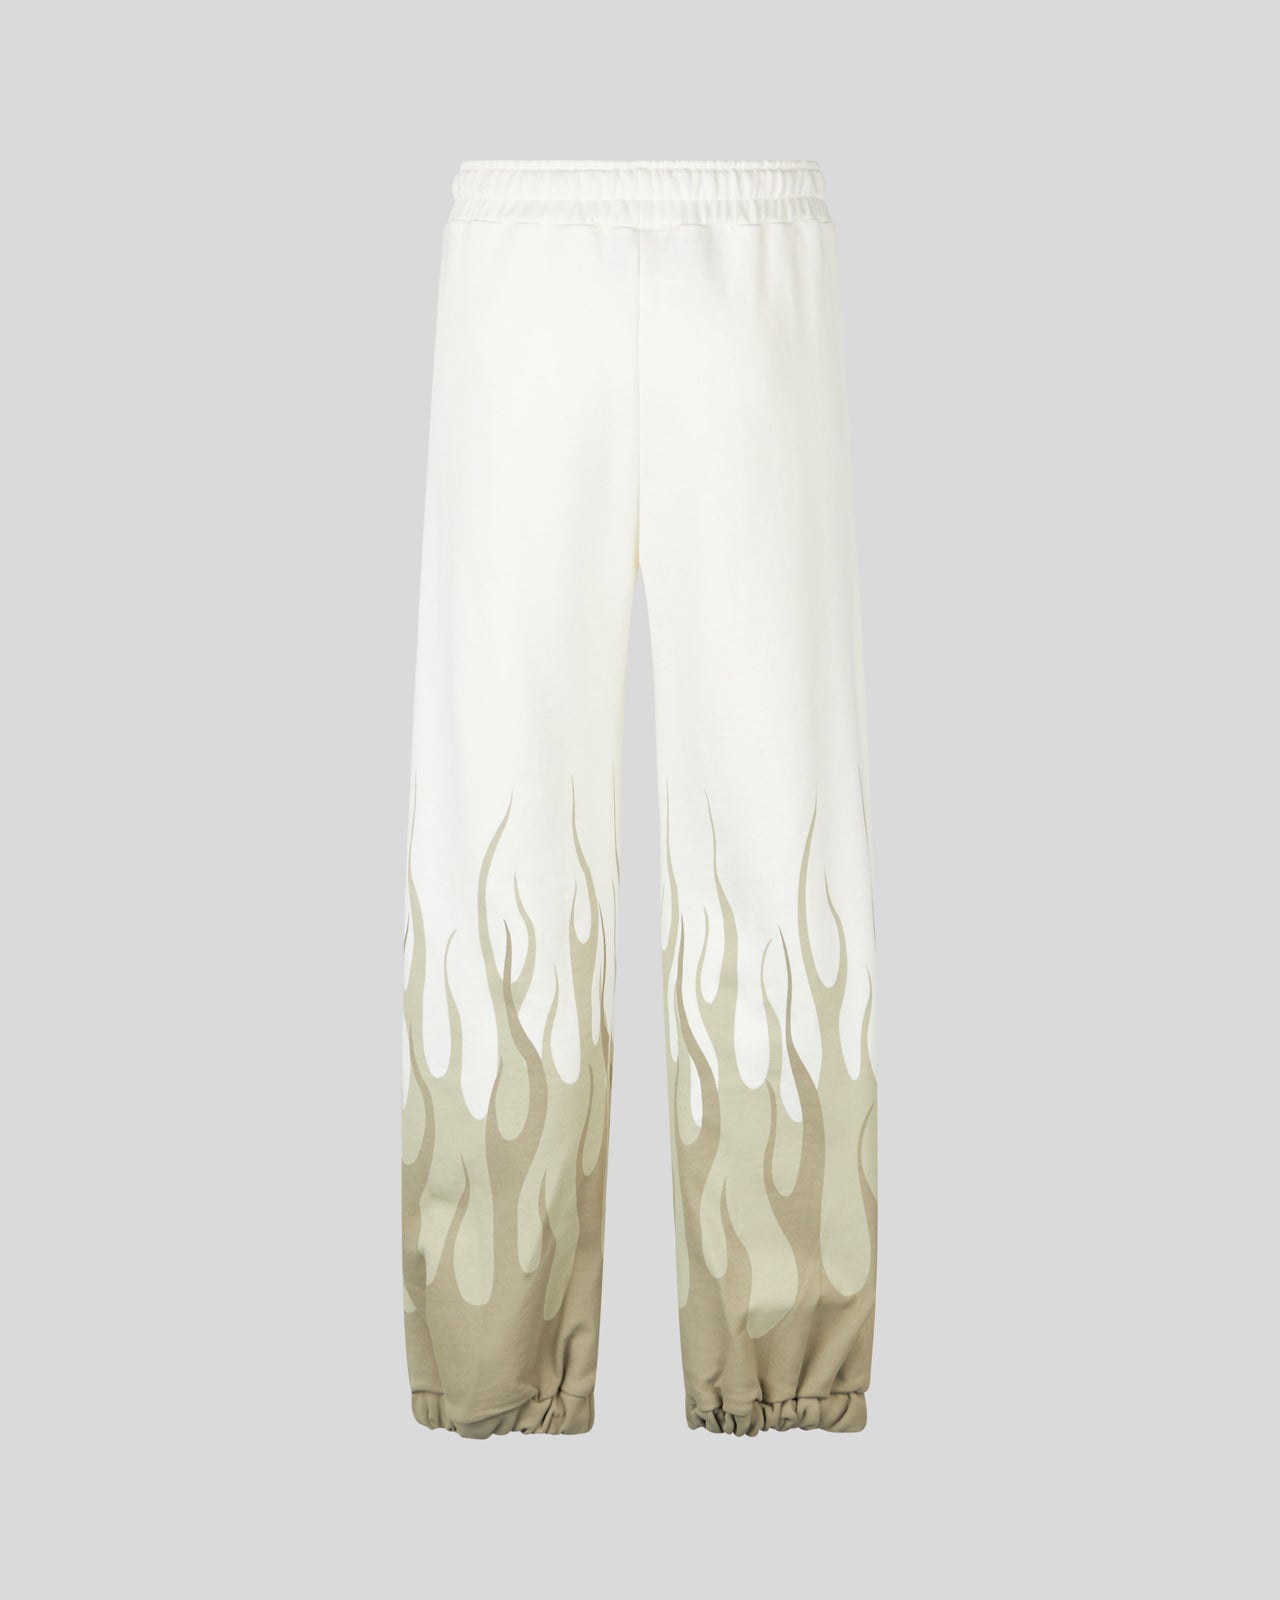 WHITE PANTS WITH DOUBLE SAND FLAMES PRINT